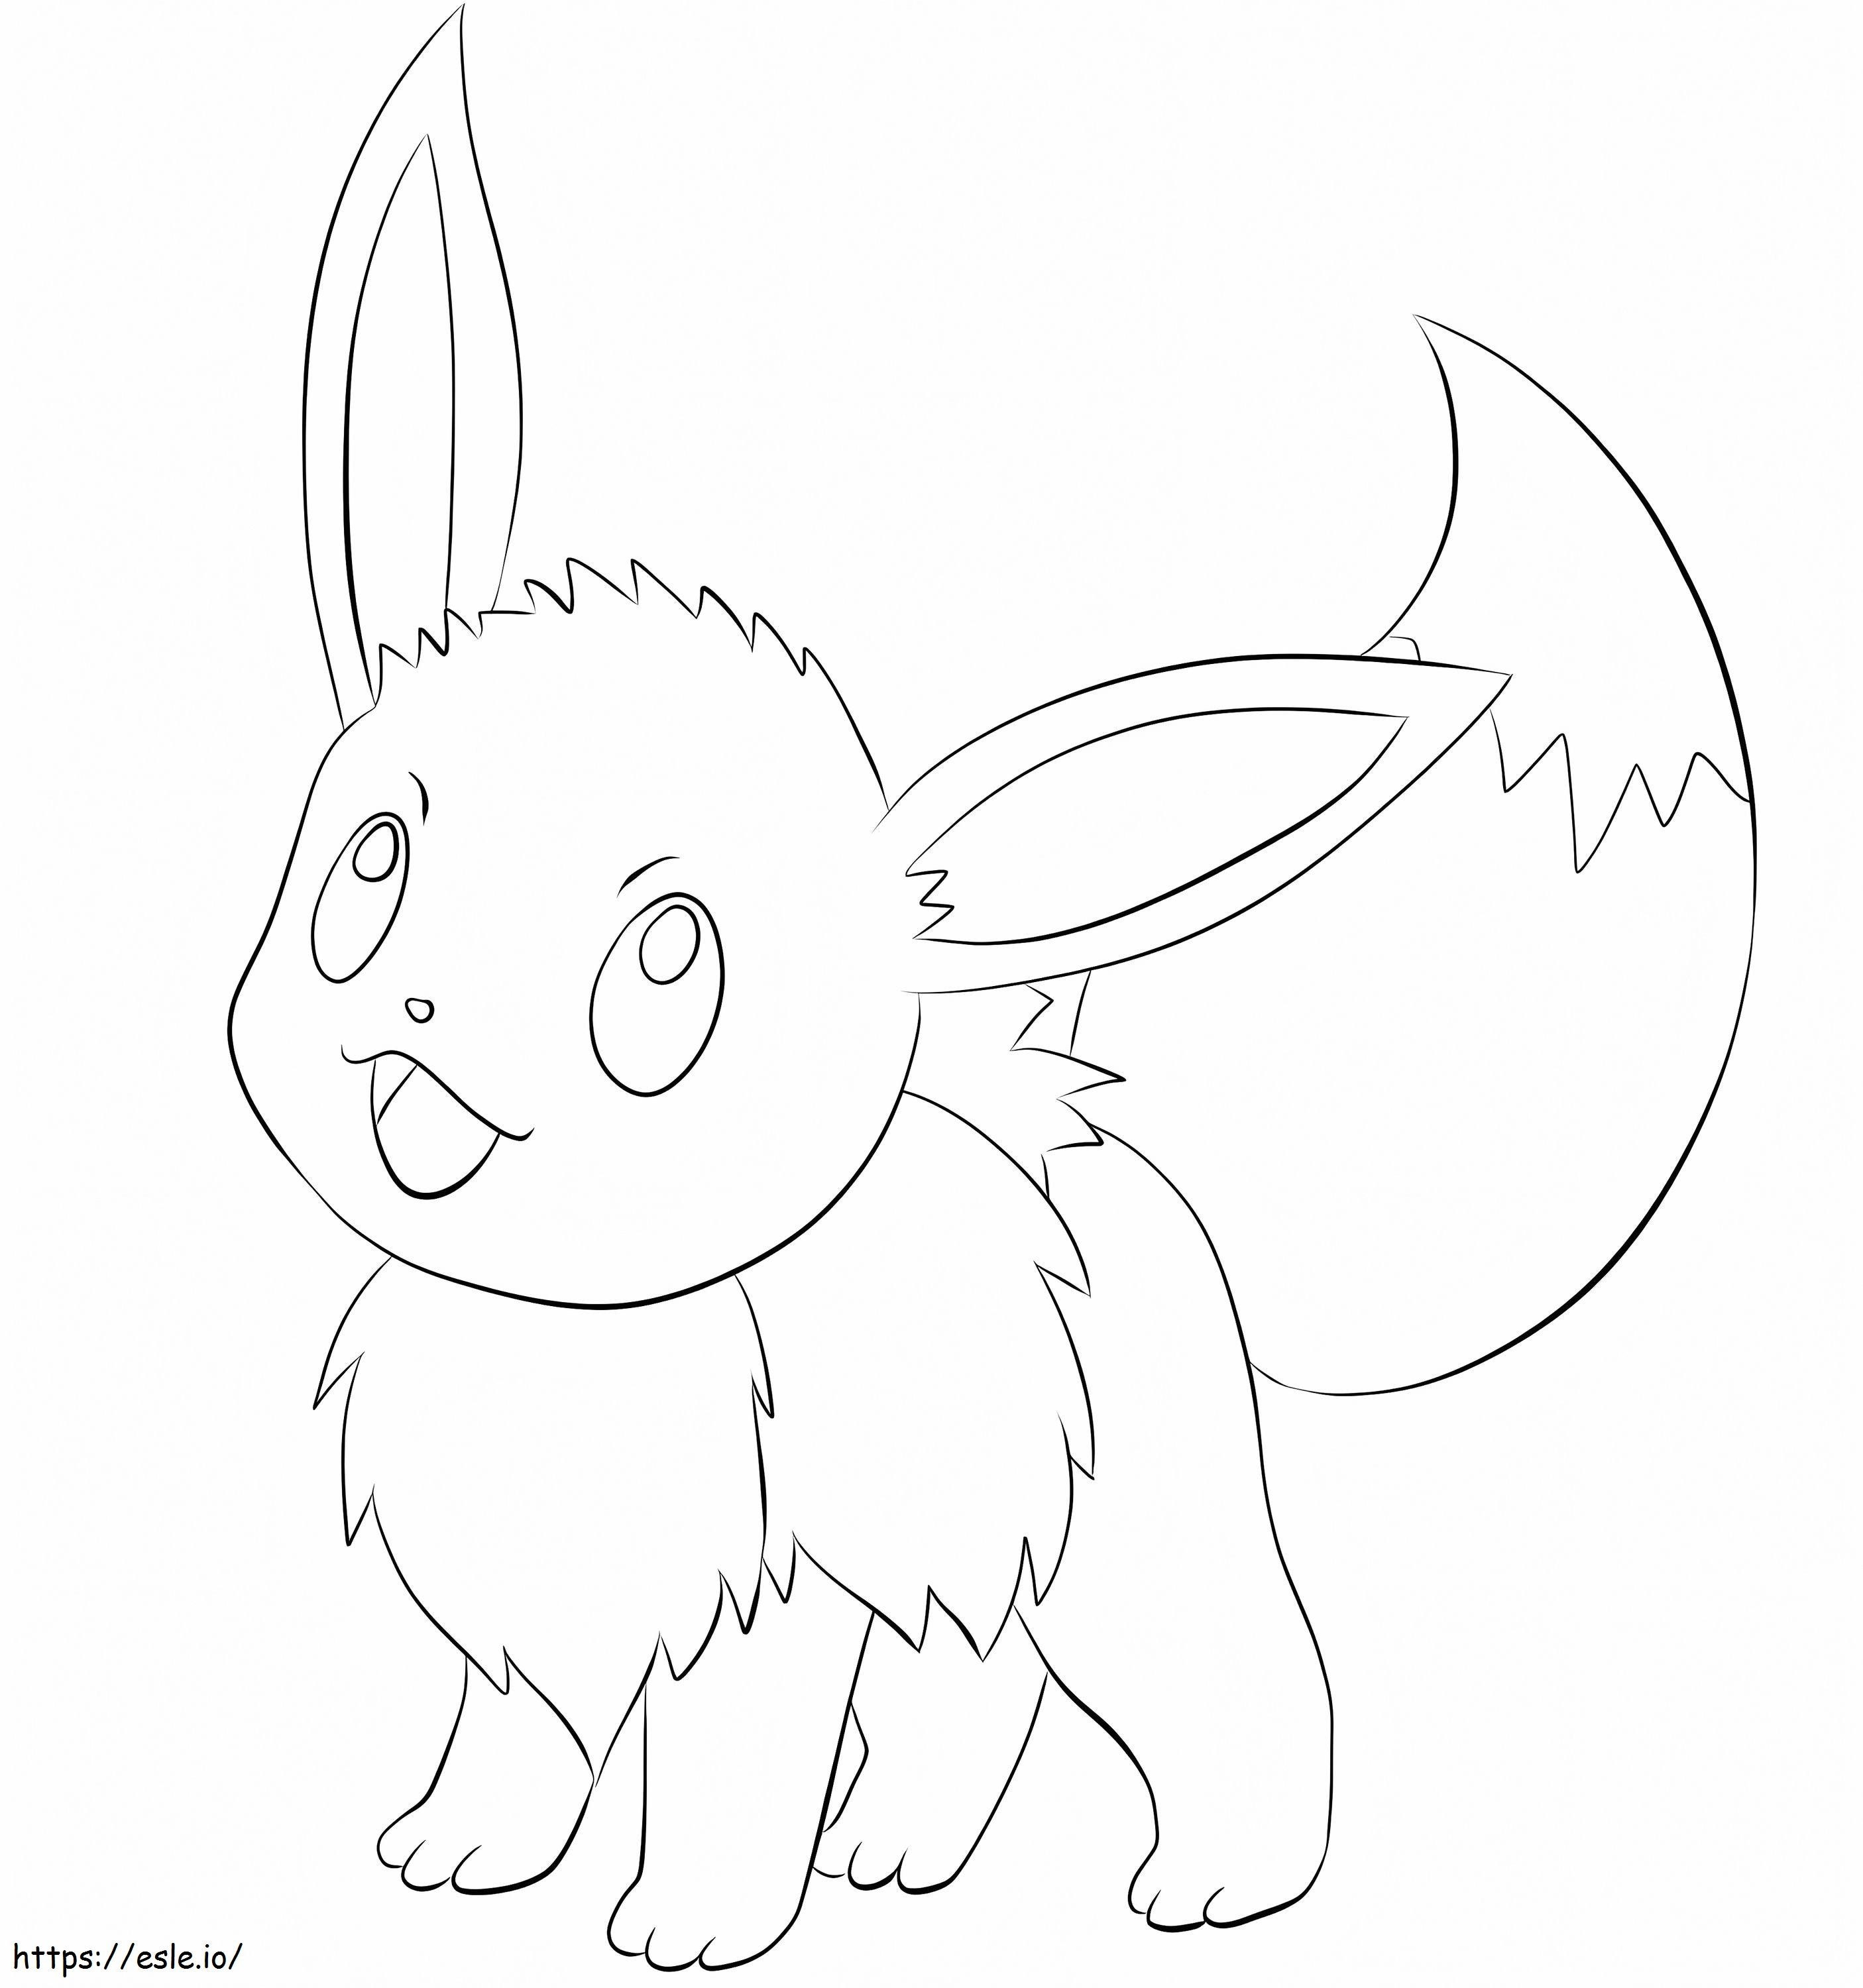 Smiling Eevee coloring page